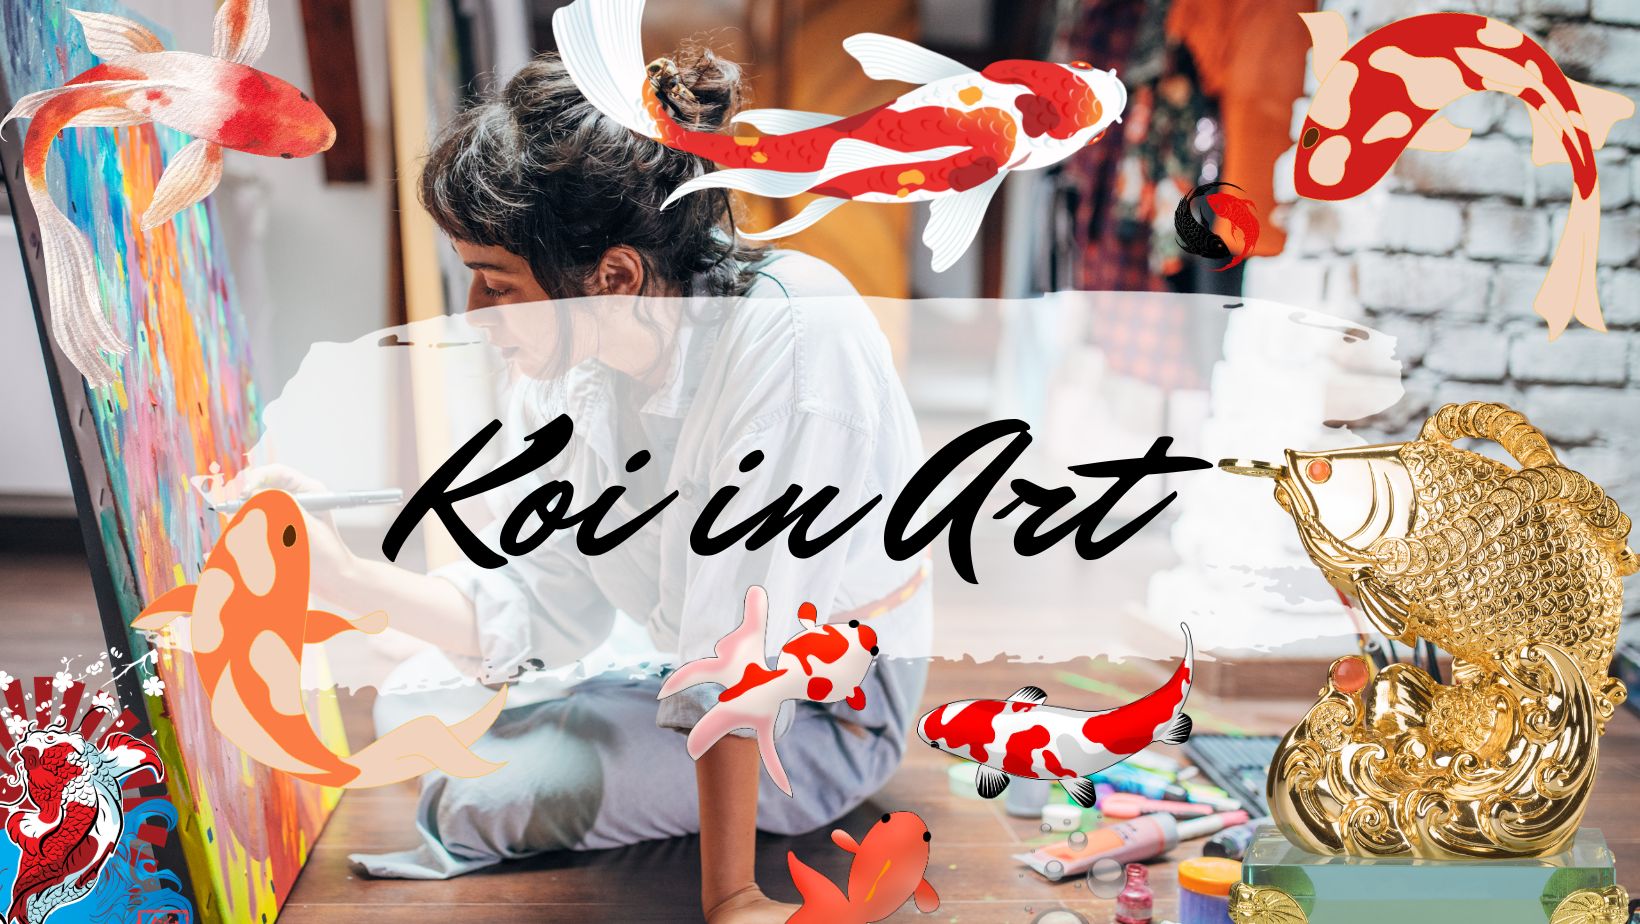 Koi in Art & Literature: Dive into Their Enduring Presence